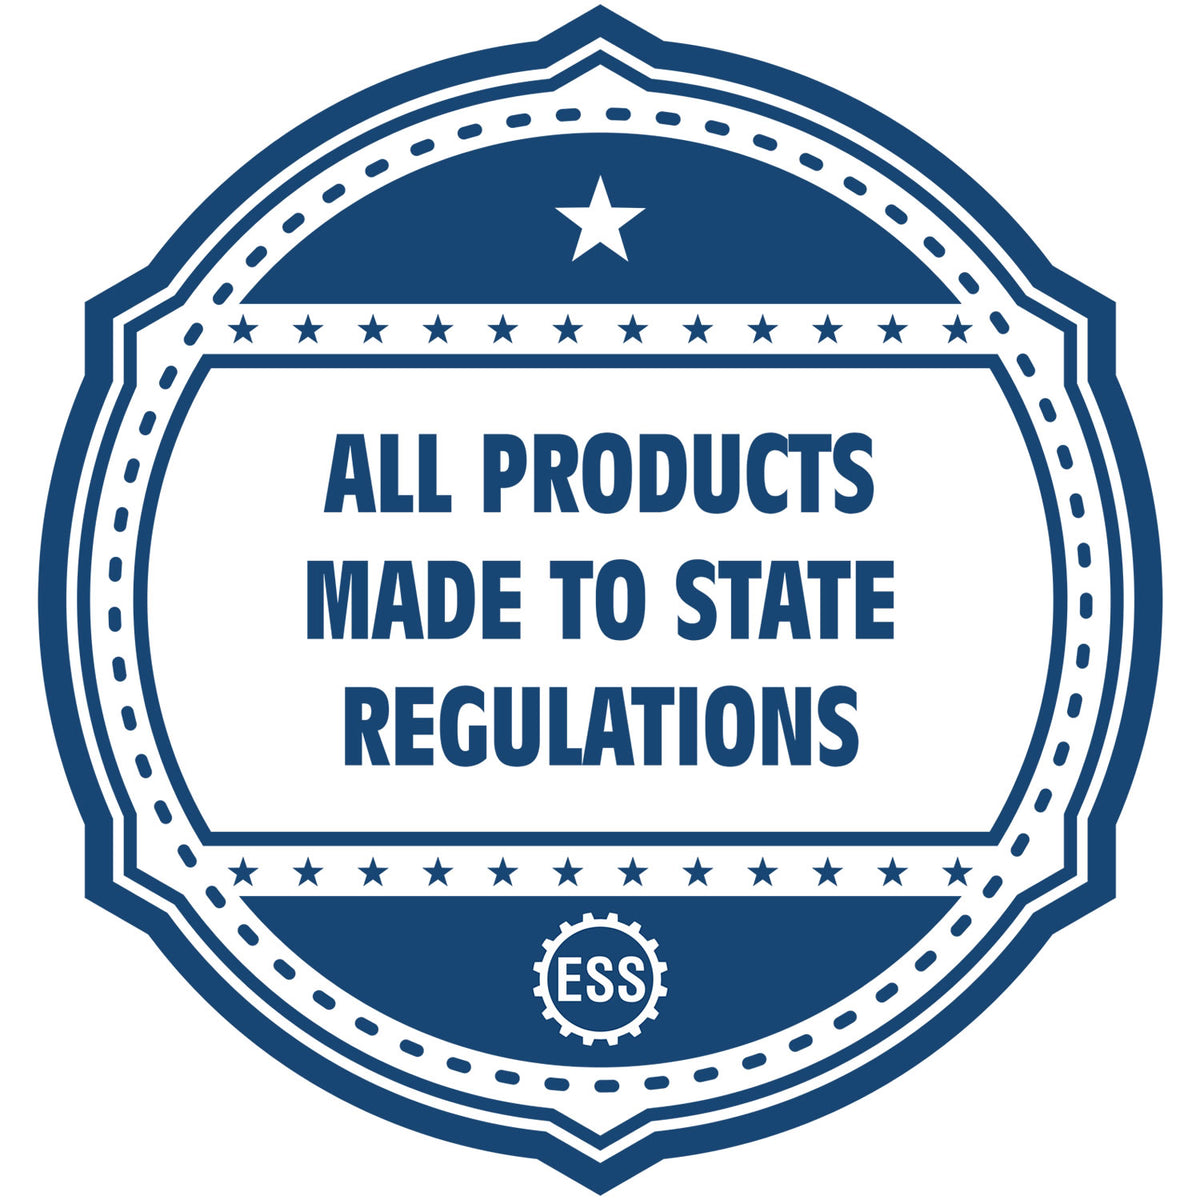 An icon or badge element for the State of Vermont Extended Long Reach Engineer Seal showing that this product is made in compliance with state regulations.